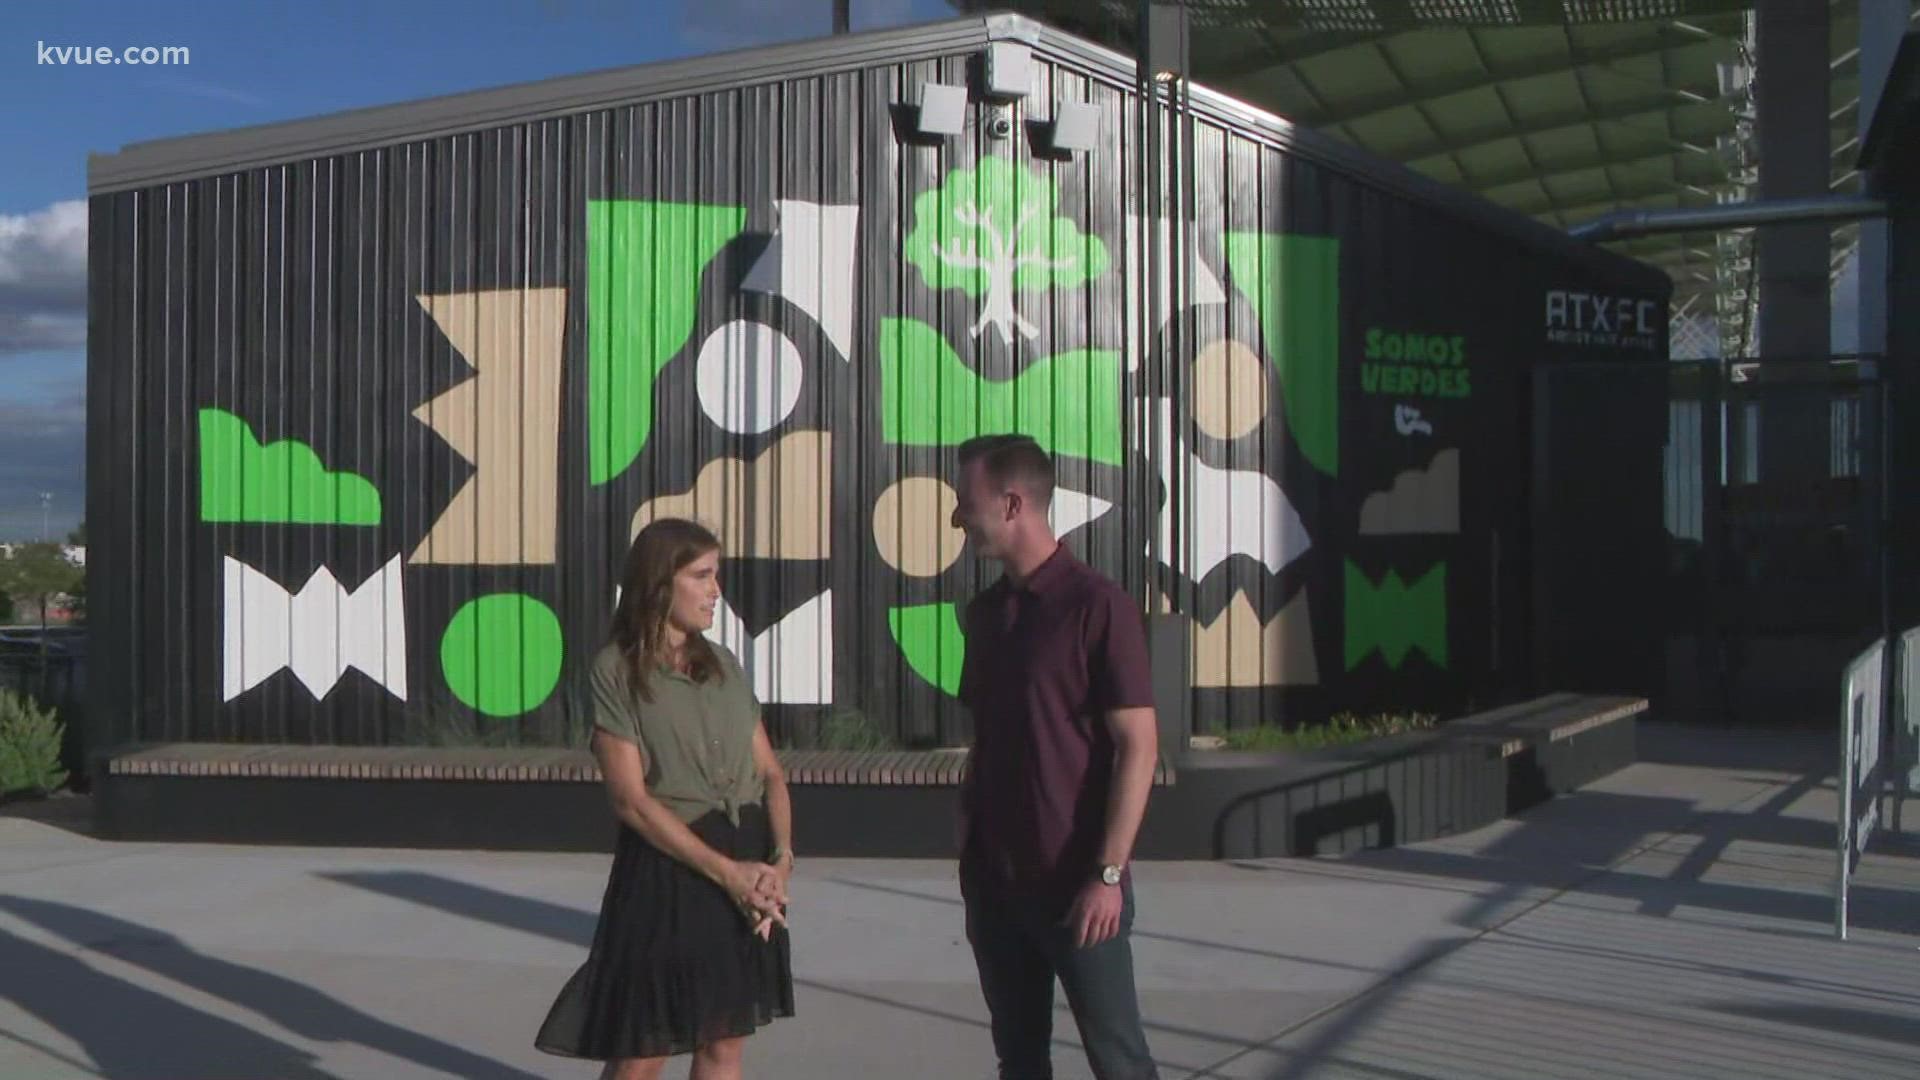 The mural, created by Austin-based artist Will Bryant, was unveiled on Wednesday before Austin FC's match against LAFC.